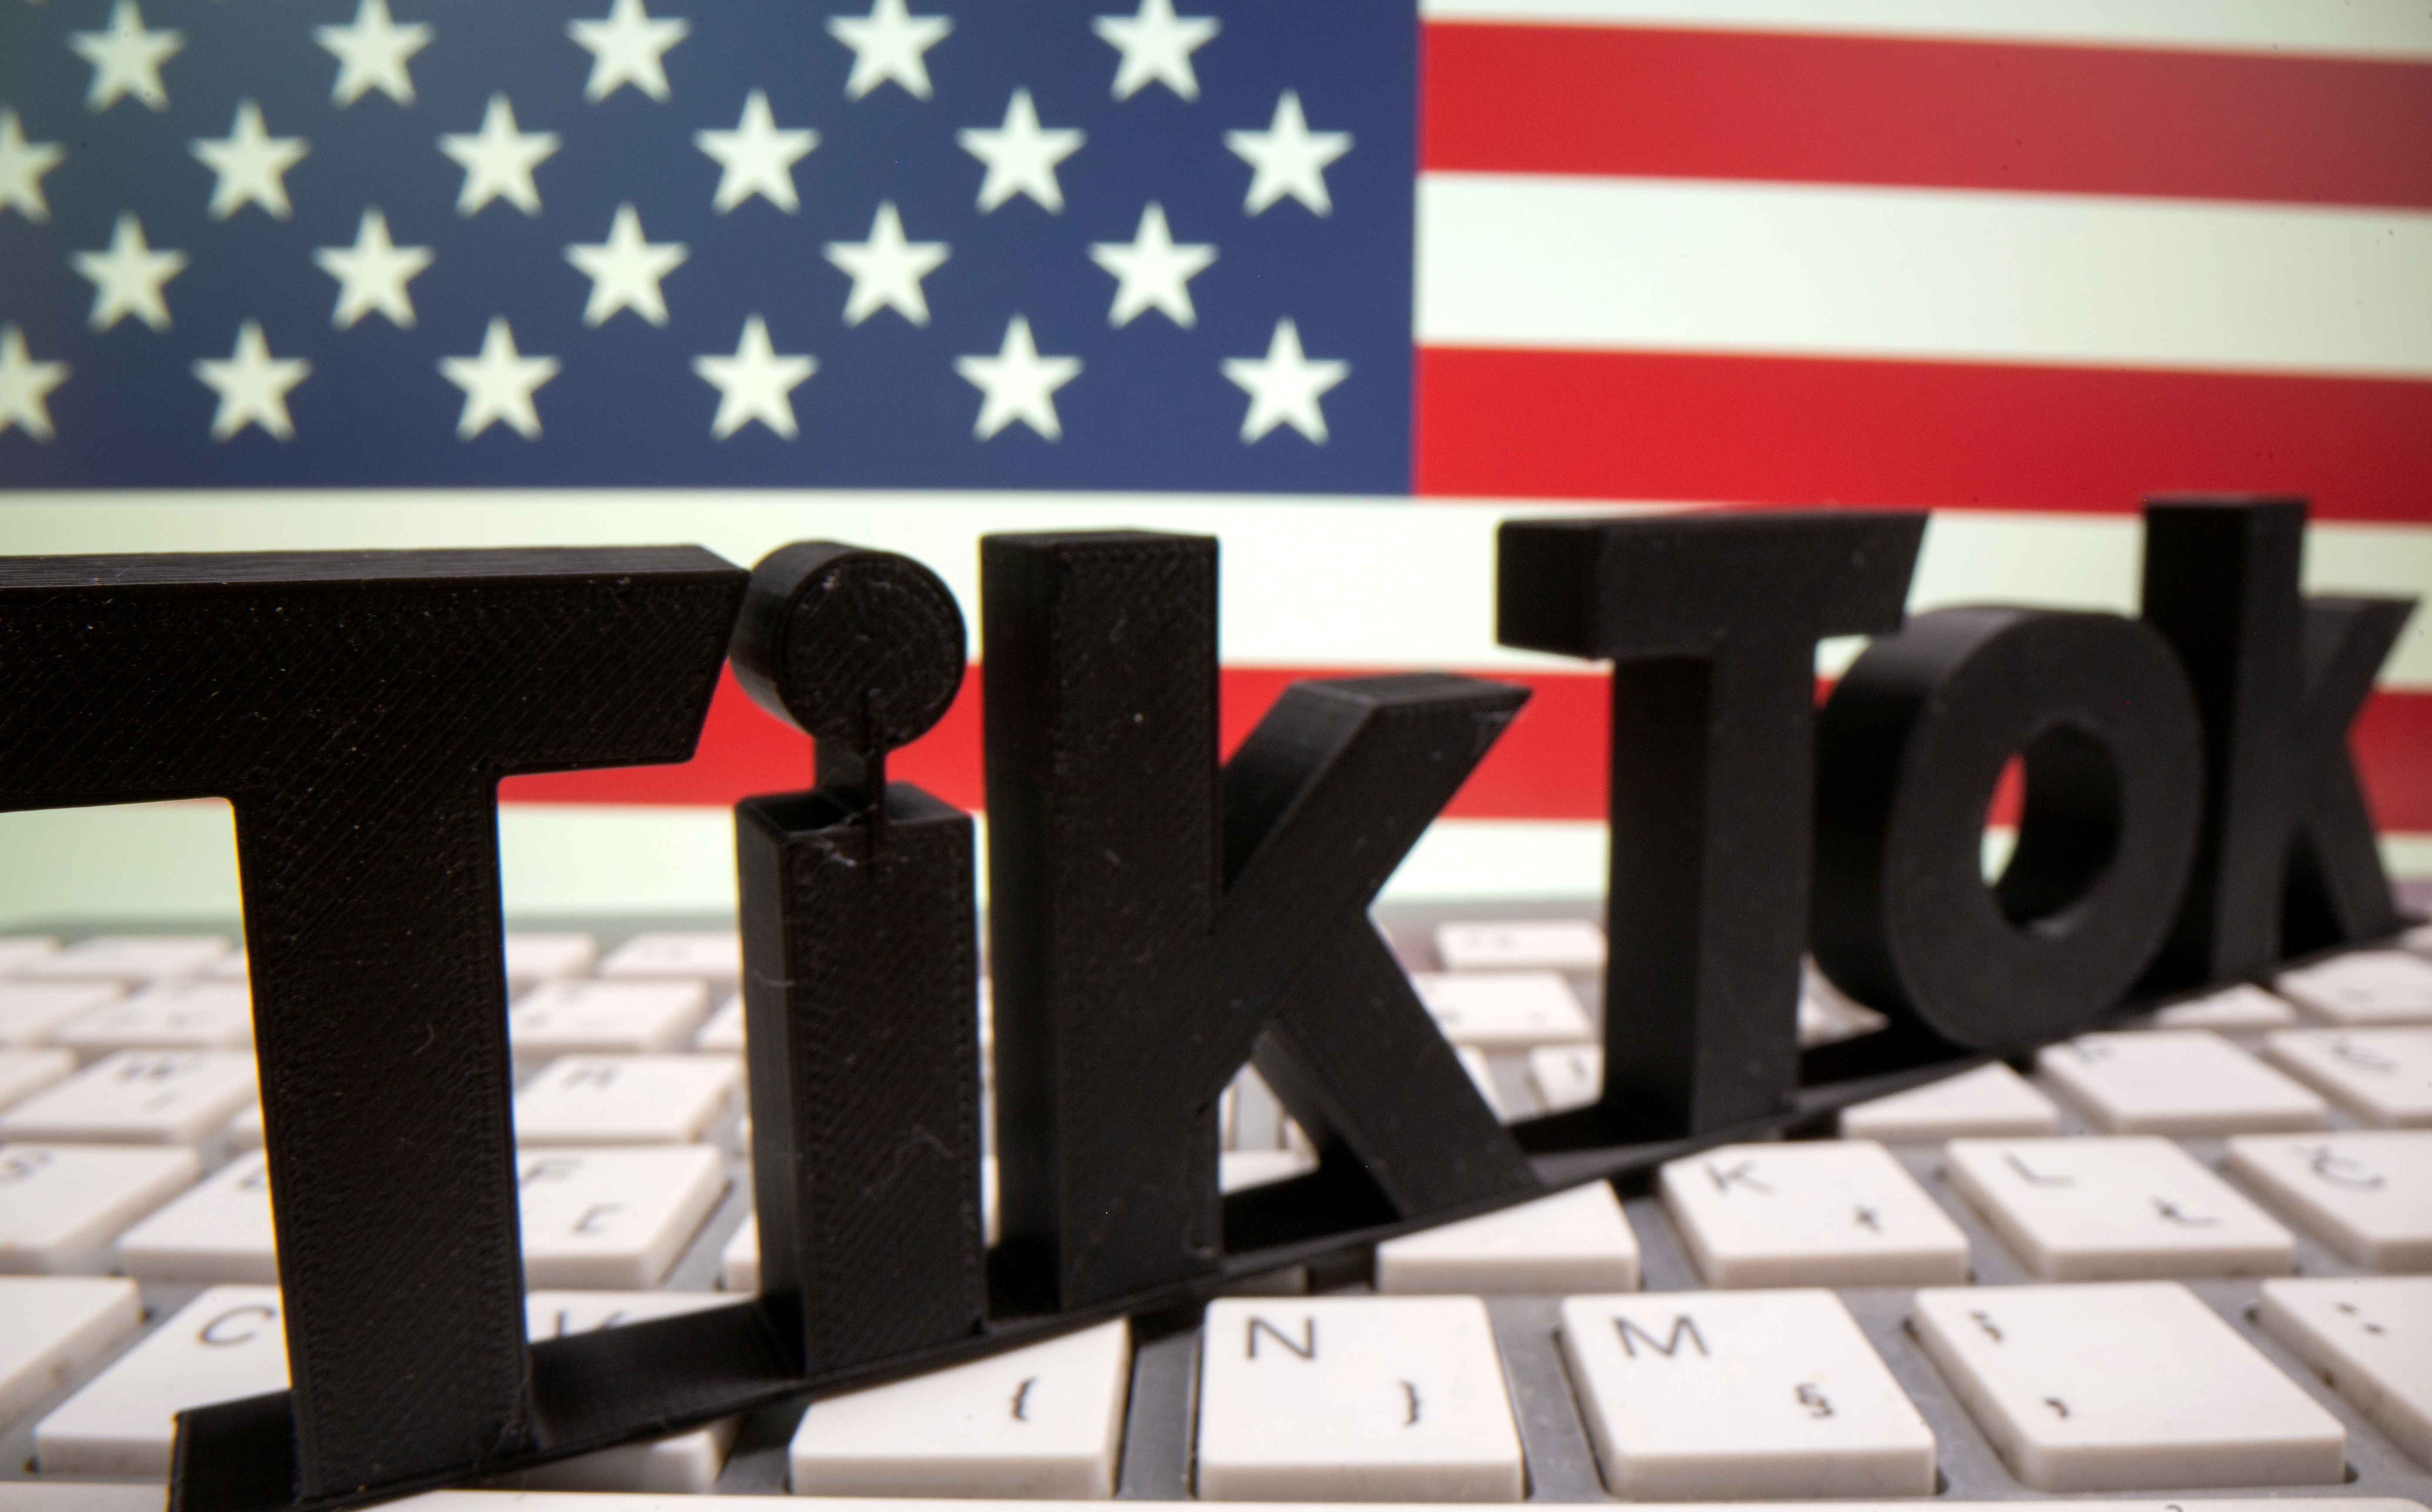 A 3D printed Tik Tok logo is placed on a keyboard in front of U.S. flag in this illustration